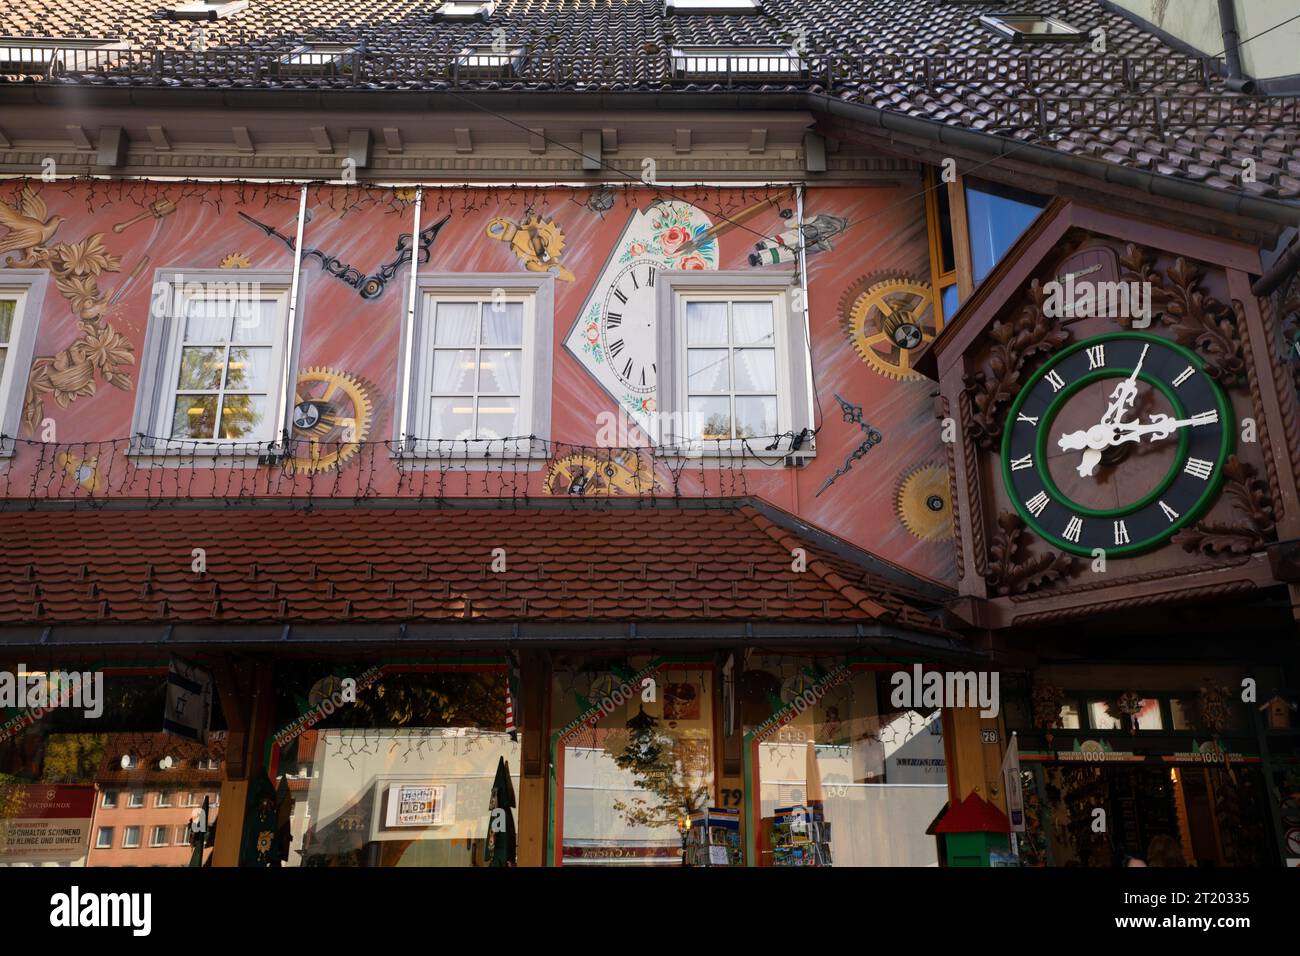 Triberg town famous for coo coo clock shops and stores, Black Forest region, Baden-Württemberg, Germany. Stock Photo